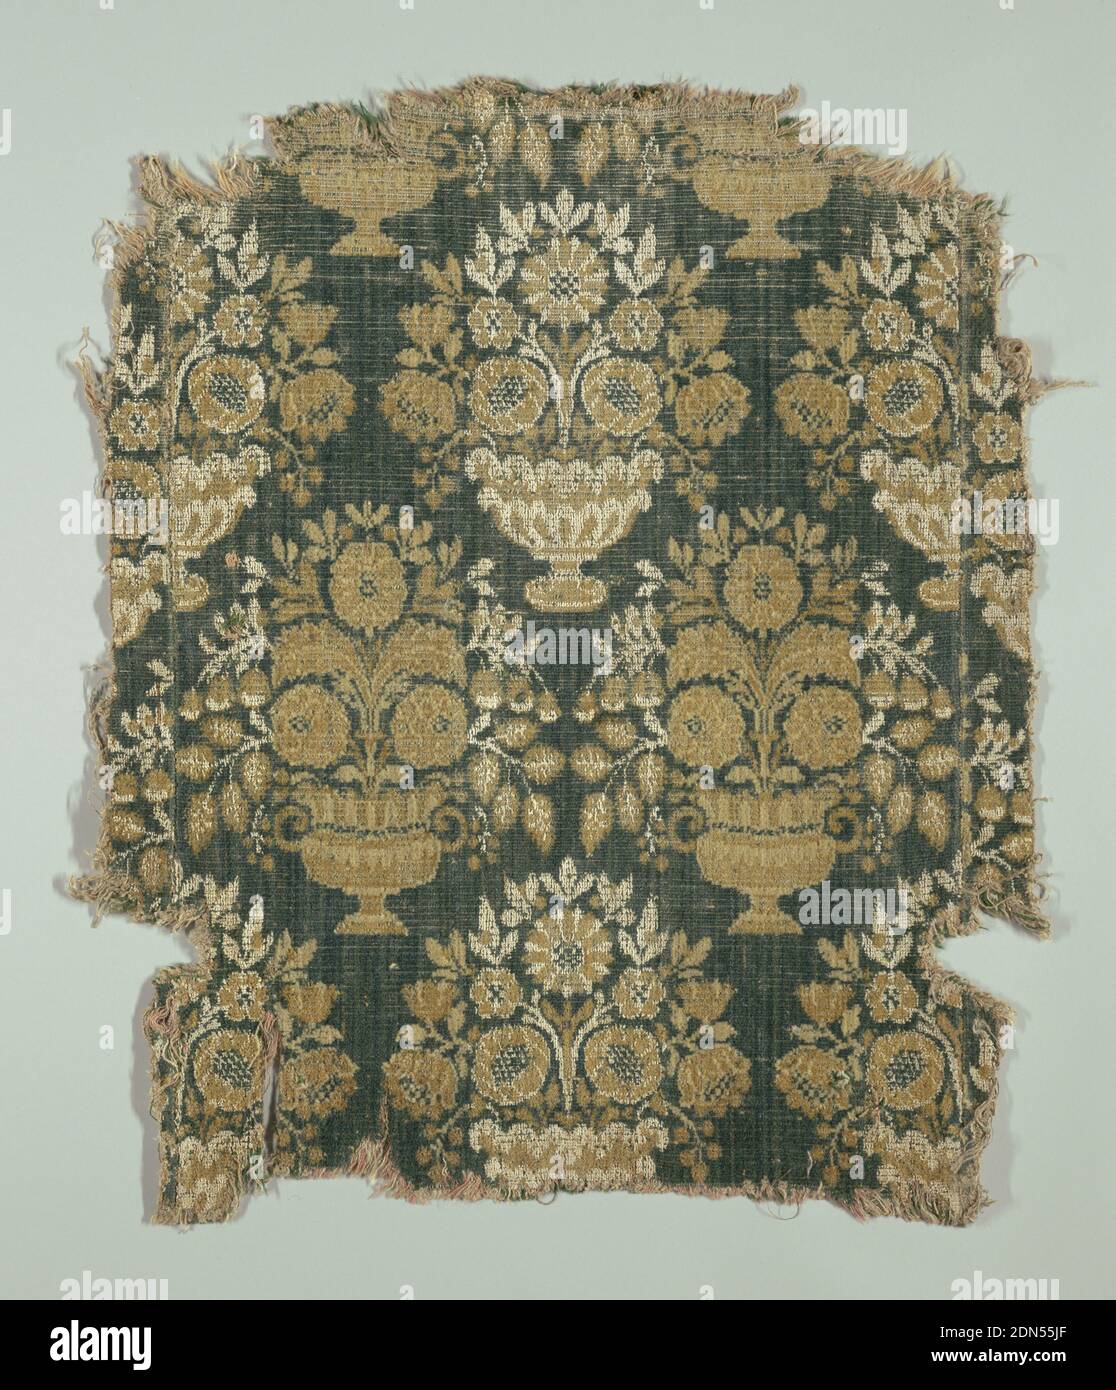 Carpet fragment, Medium: wool, linen Technique: cut velvet (moquette or  velour d'Amiens), Large repeat of symmetrical bouquet in urns; rose and tan  wool, white linen, on dark blue-green wool ground. Broad warp-surfaced